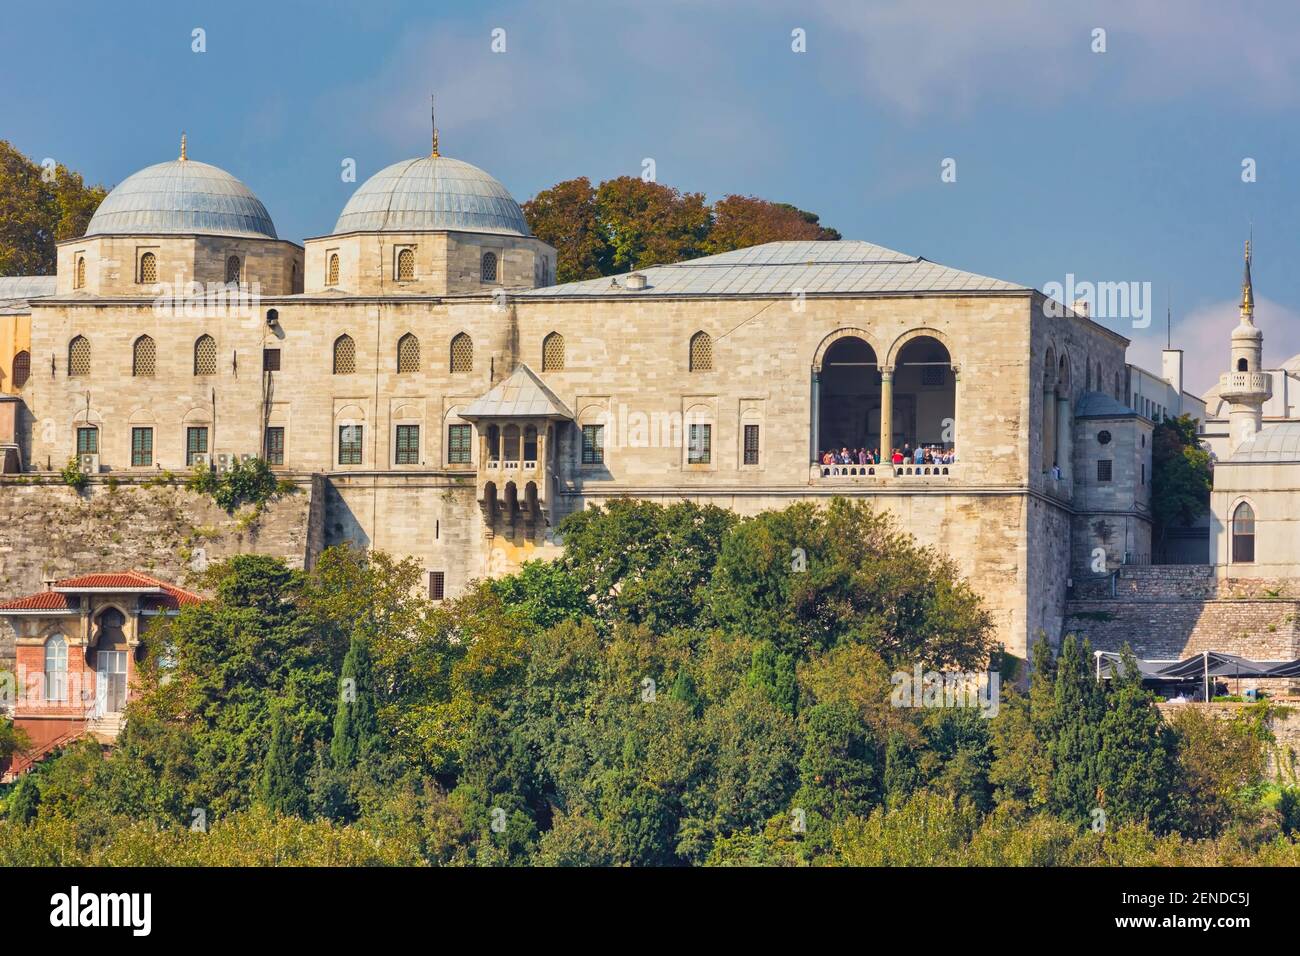 Istanbul, Turkey.  Topkapi Palace seen from the sea. Topkapi Sarayi.  Topkapi is part of the Historic Areas of Istanbul which is a UNESCO World Herita Stock Photo